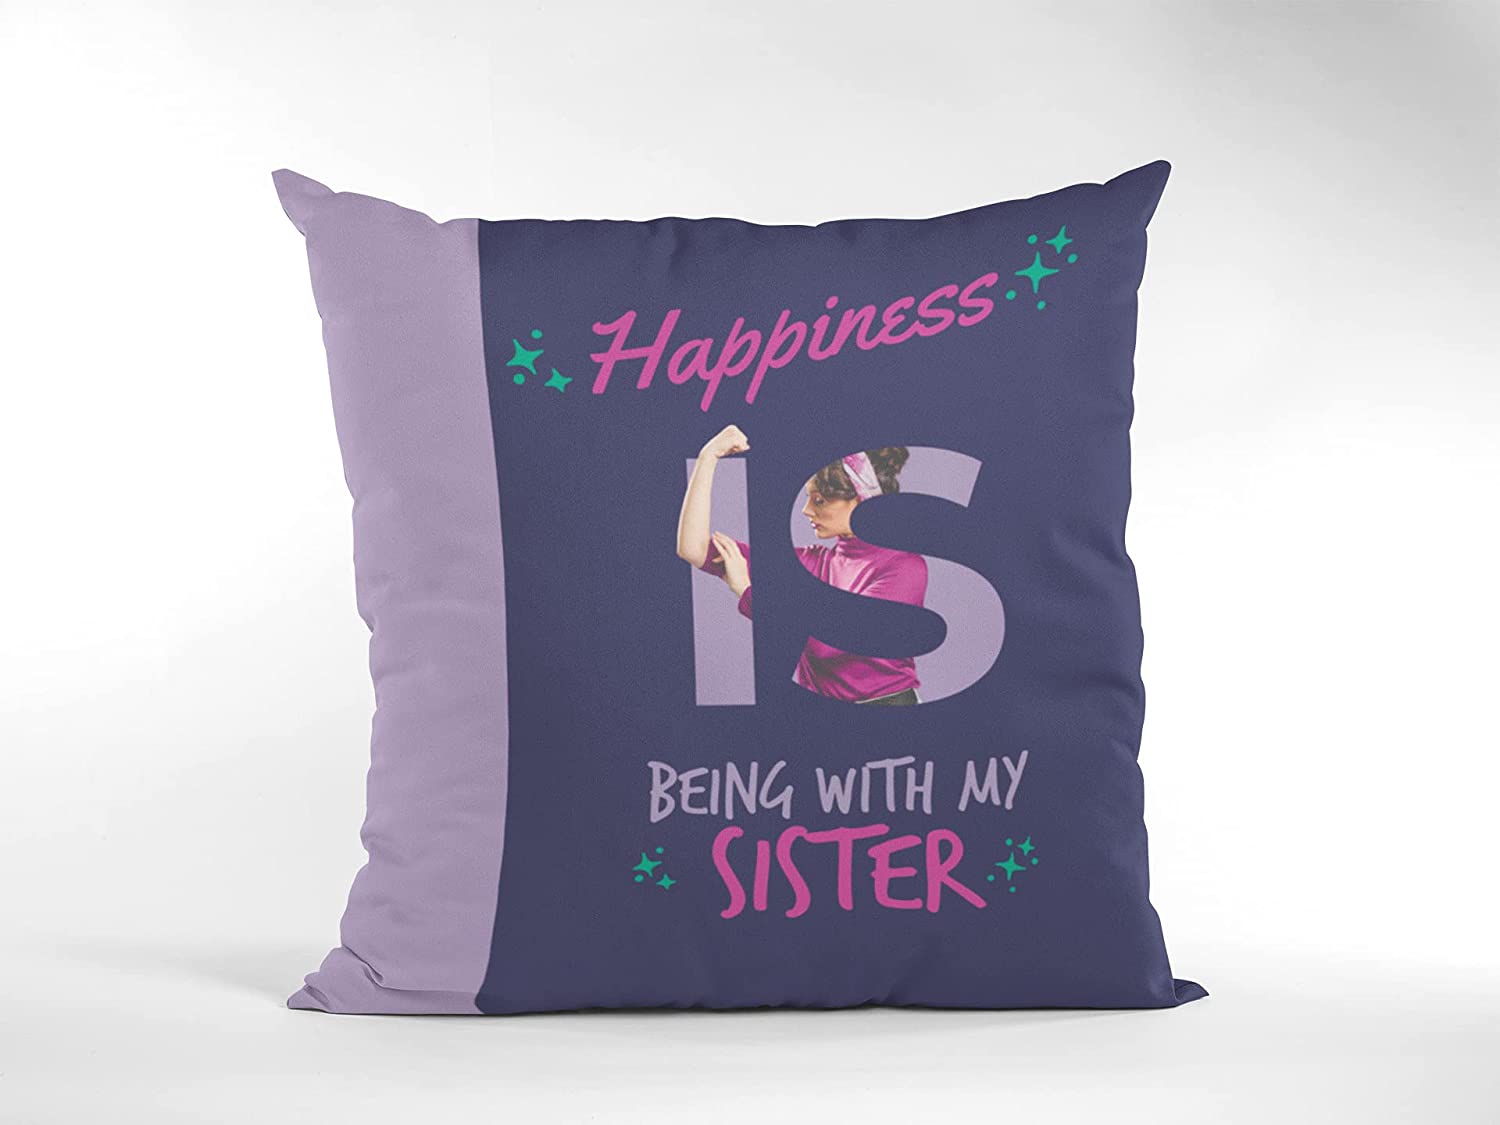 Just Hug This Pillow When You're Missing Me - Gift For Mother -  Personalized Custom Pillow | Custom pillows, Gifts, Mother gifts